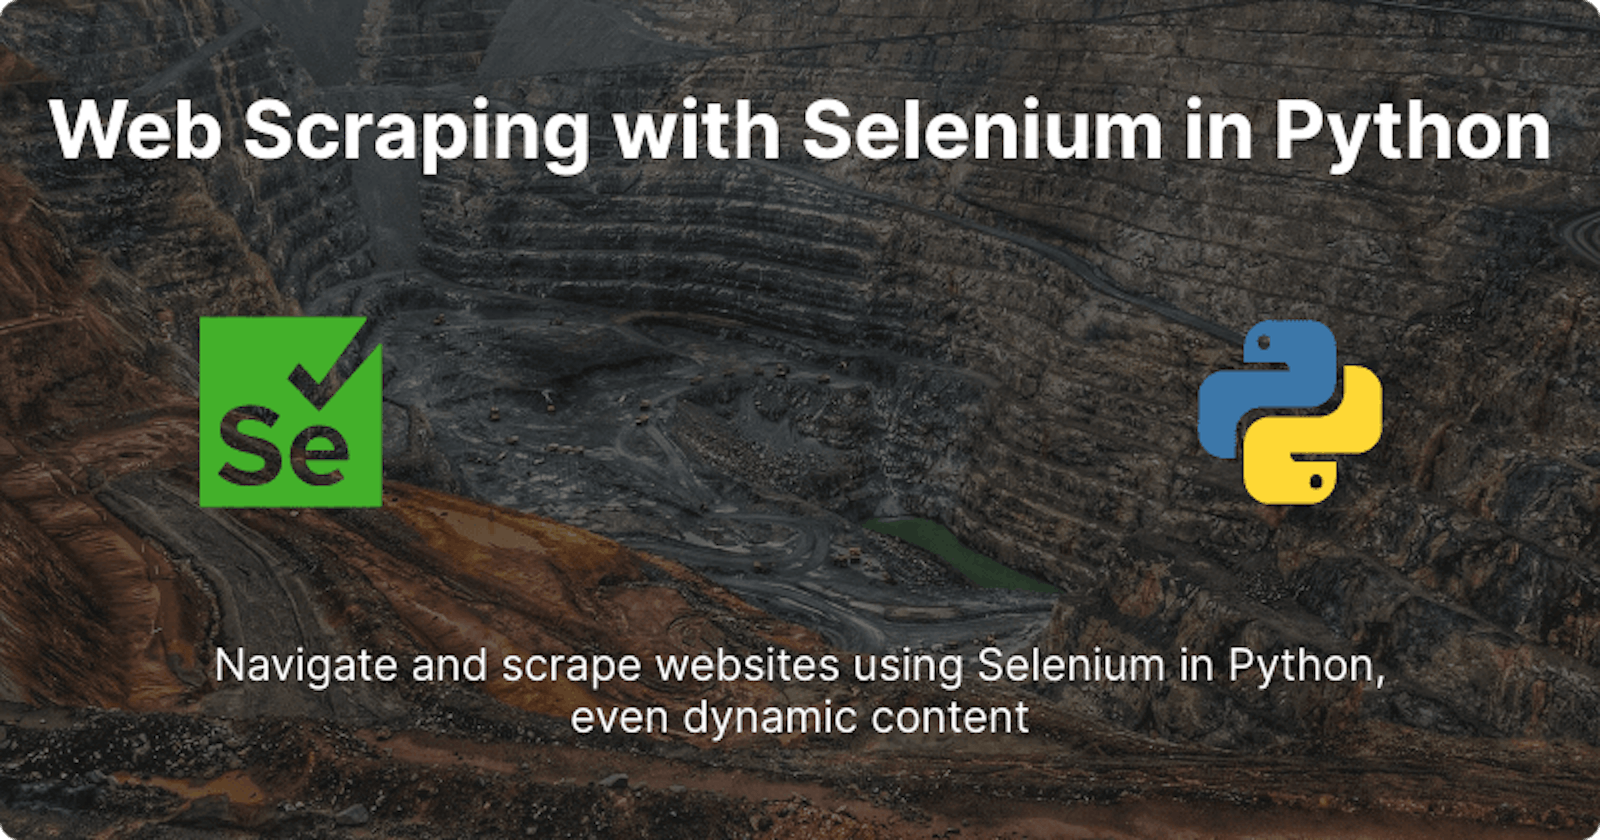 Web Scraping with Selenium in Python